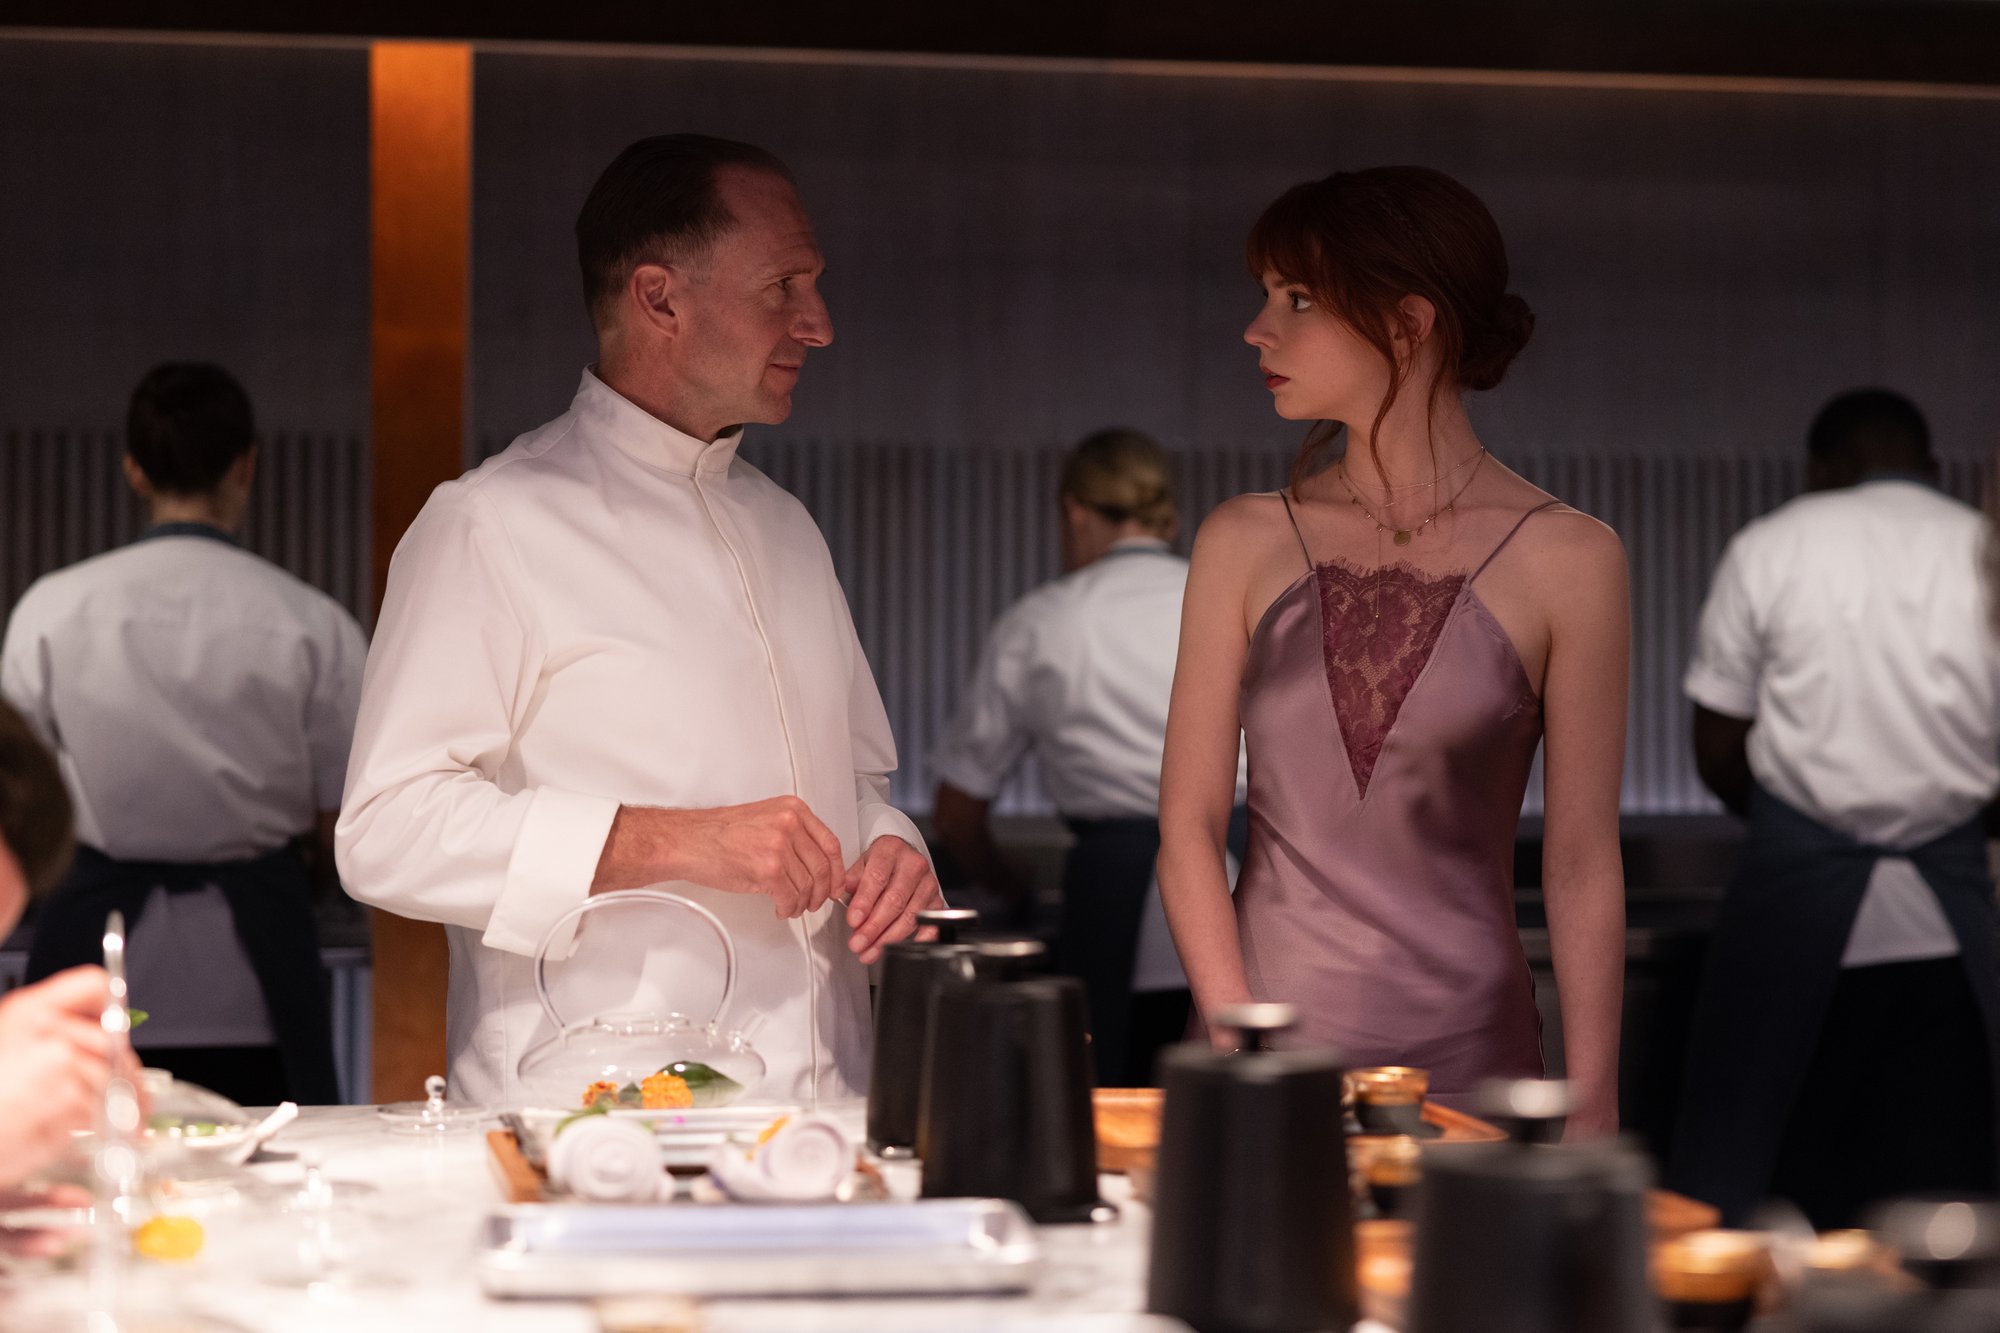 Ralph Fiennes, a white man in a white chef’s coat with short cropped hair, stands talking to Anya Taylor-Joy, a white woman with red hair in an updo who’s wearing a mauve silk dress. Behind them, kitchen employees stand with their backs turned. 